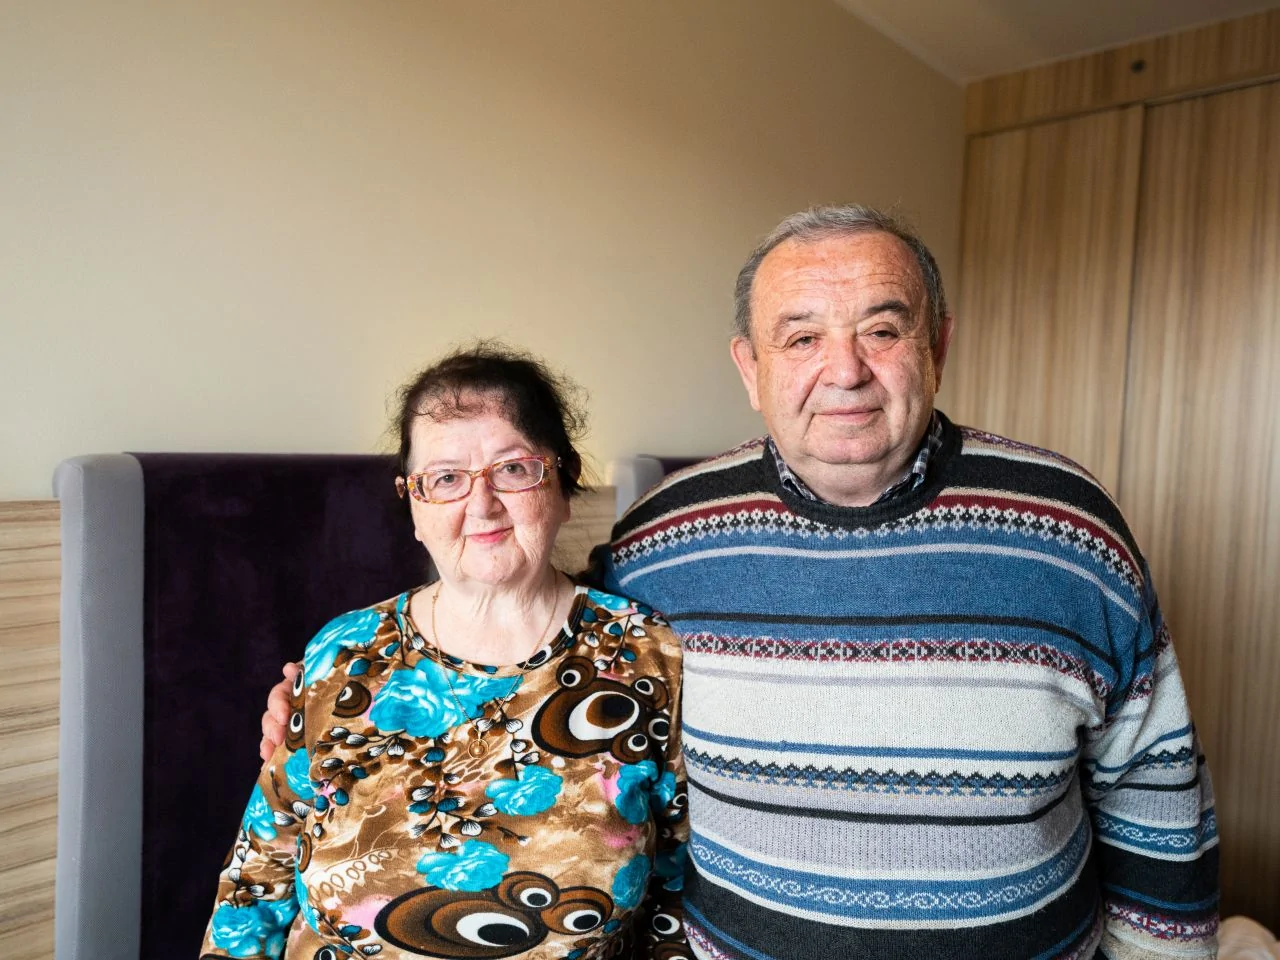 David and Raisa are brother and sister. This was their 2nd evacuation in their lifetimes, the first was during the nuclear event at the Chernobyl plant in 1986.